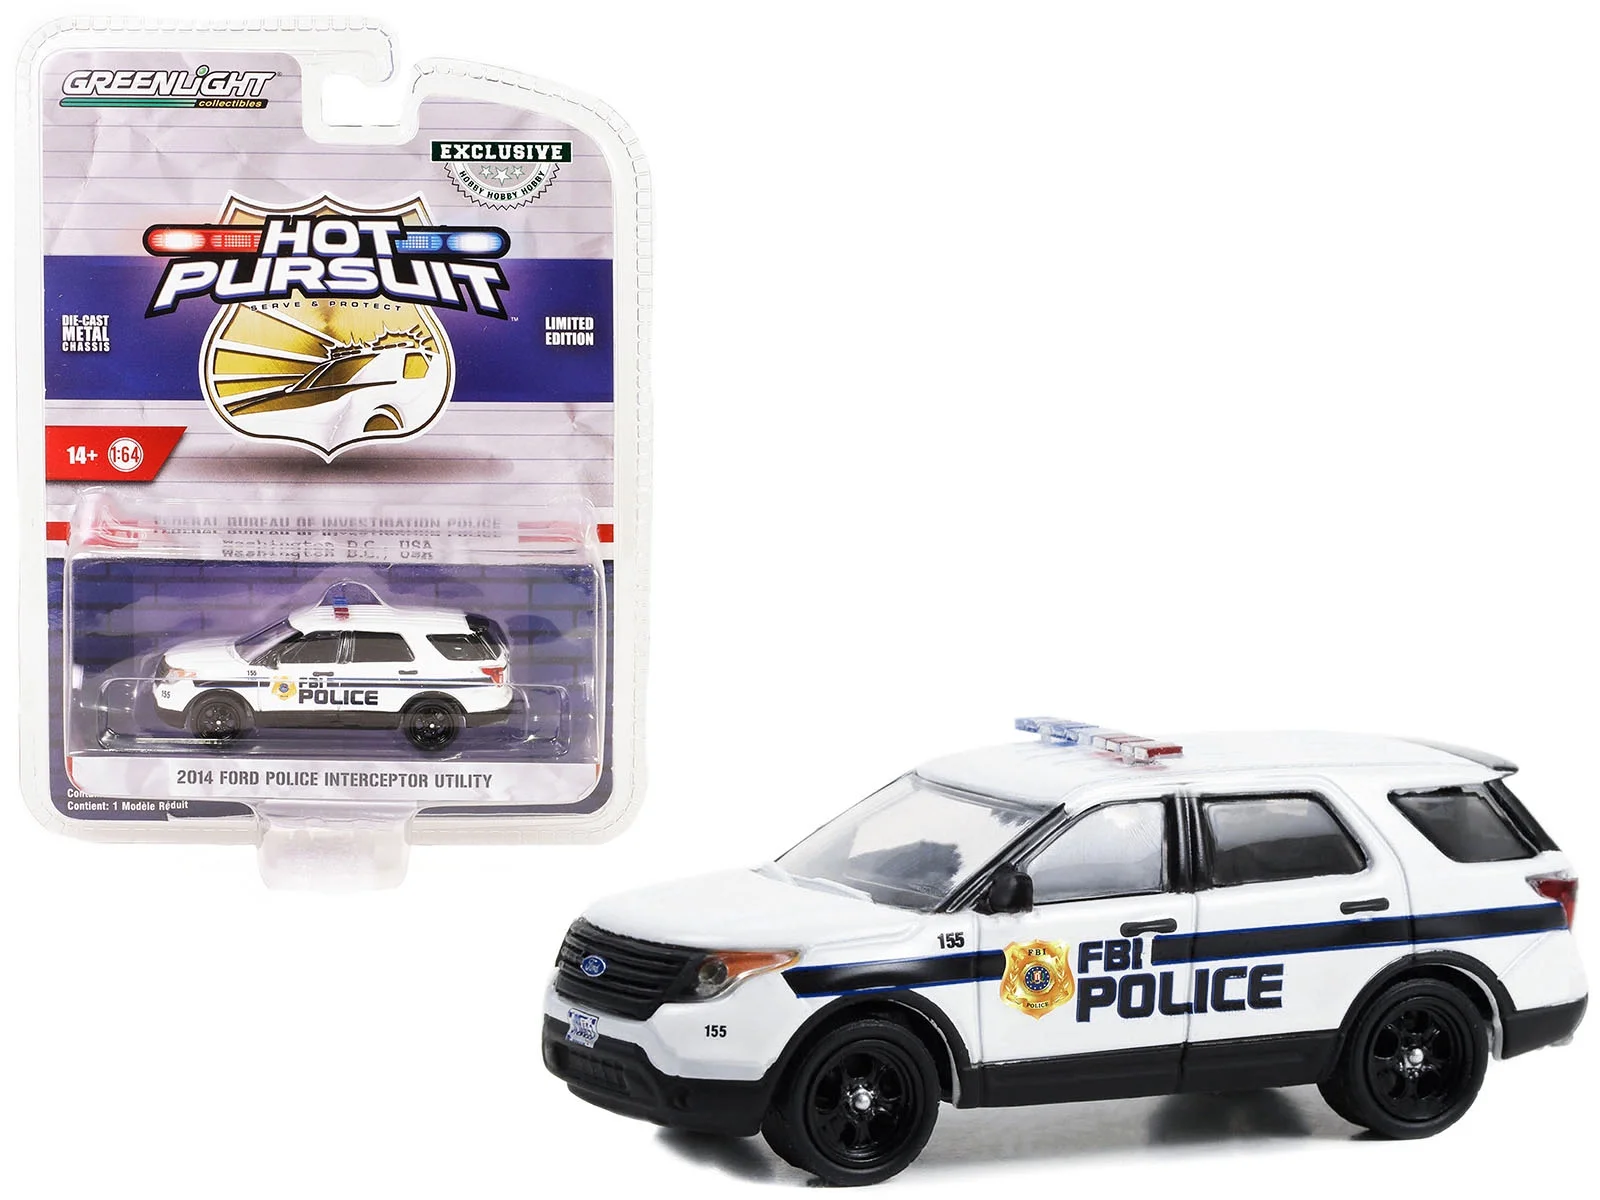 Greenlight 1/64 Hot Pursuit Special Edition - FBI Police 2014 Ford Police Interceptor Utility Solid Pack 43025-D